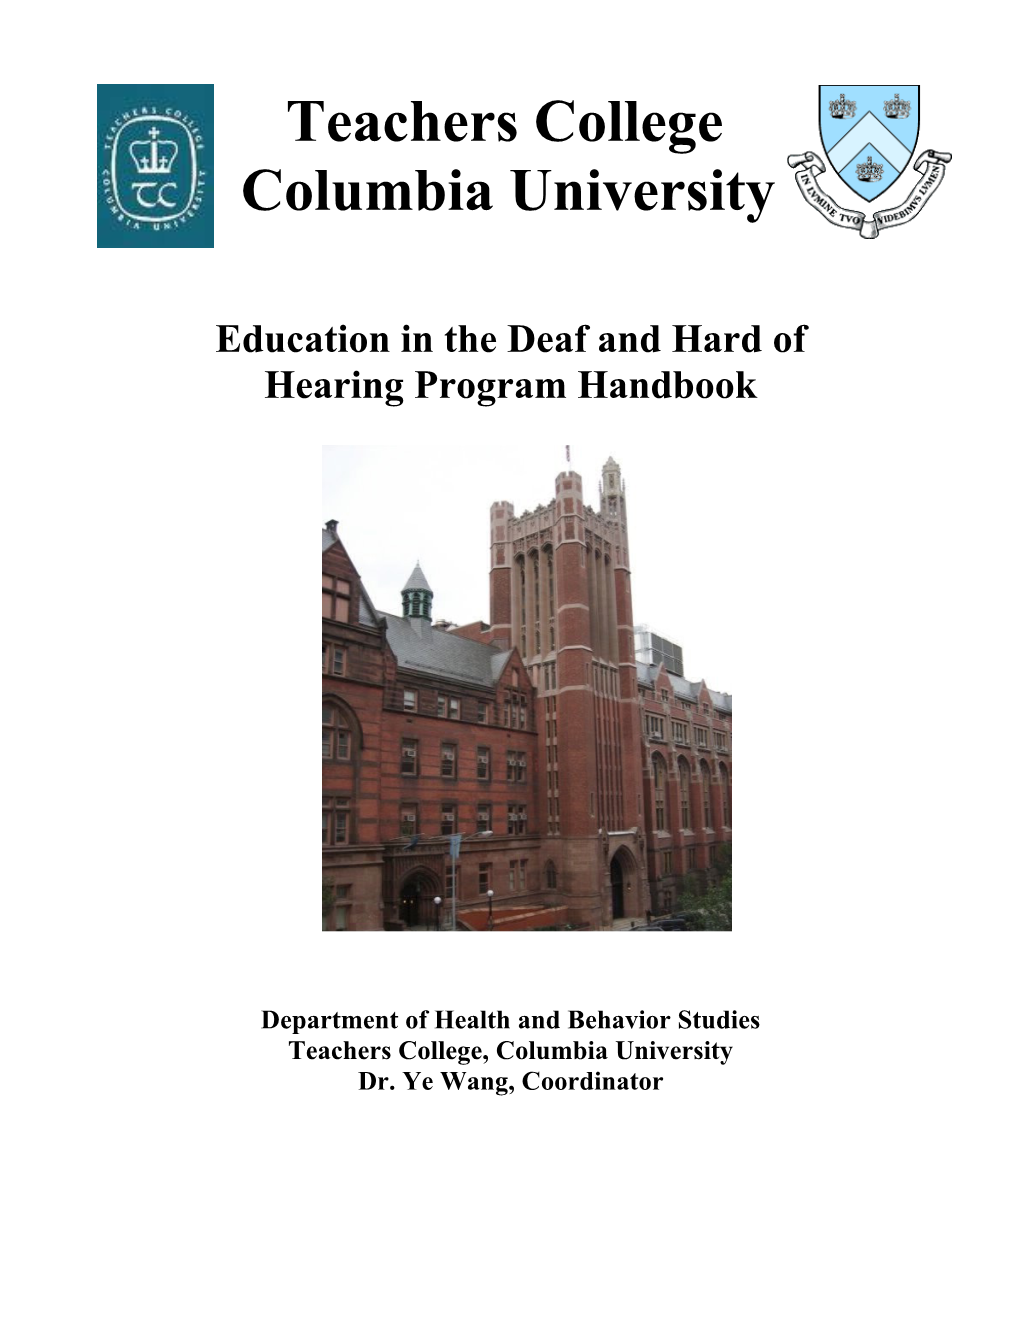 Education in the Deaf and Hard of Hearing Program Handbook